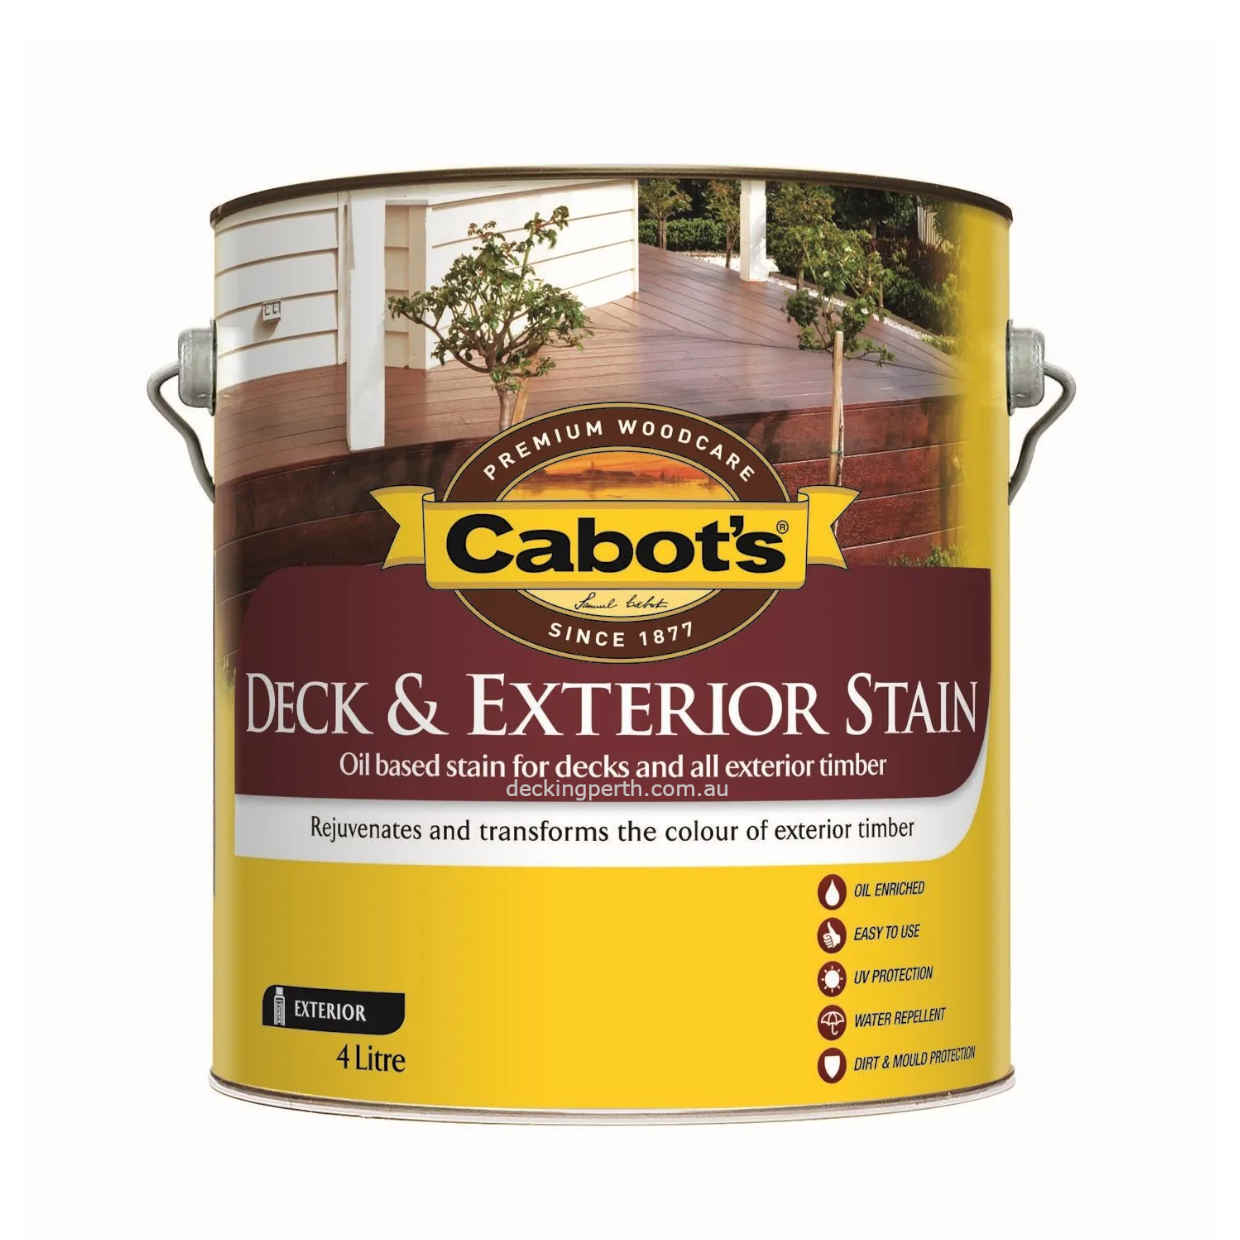 Cabots_Deck___Exterior_Stain_Oil_Based_4_Litre_Decking_Perth